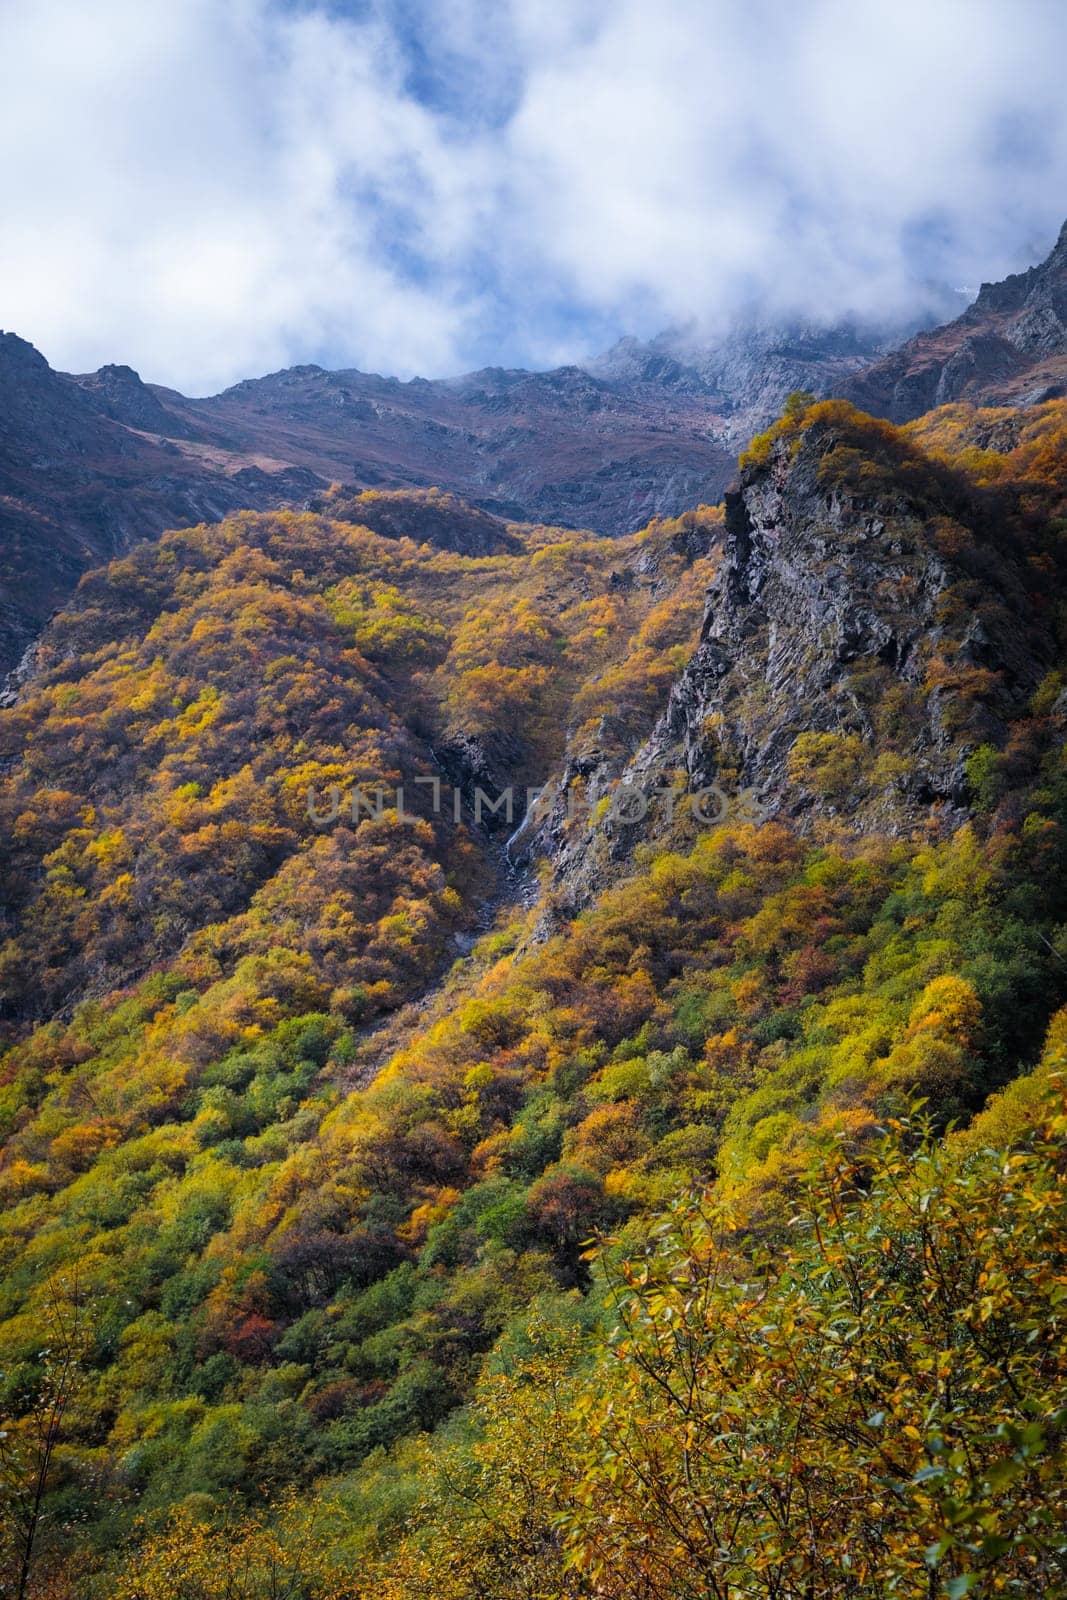 Colorful autumn transforms the mountain world, creating breathtaking landscapes